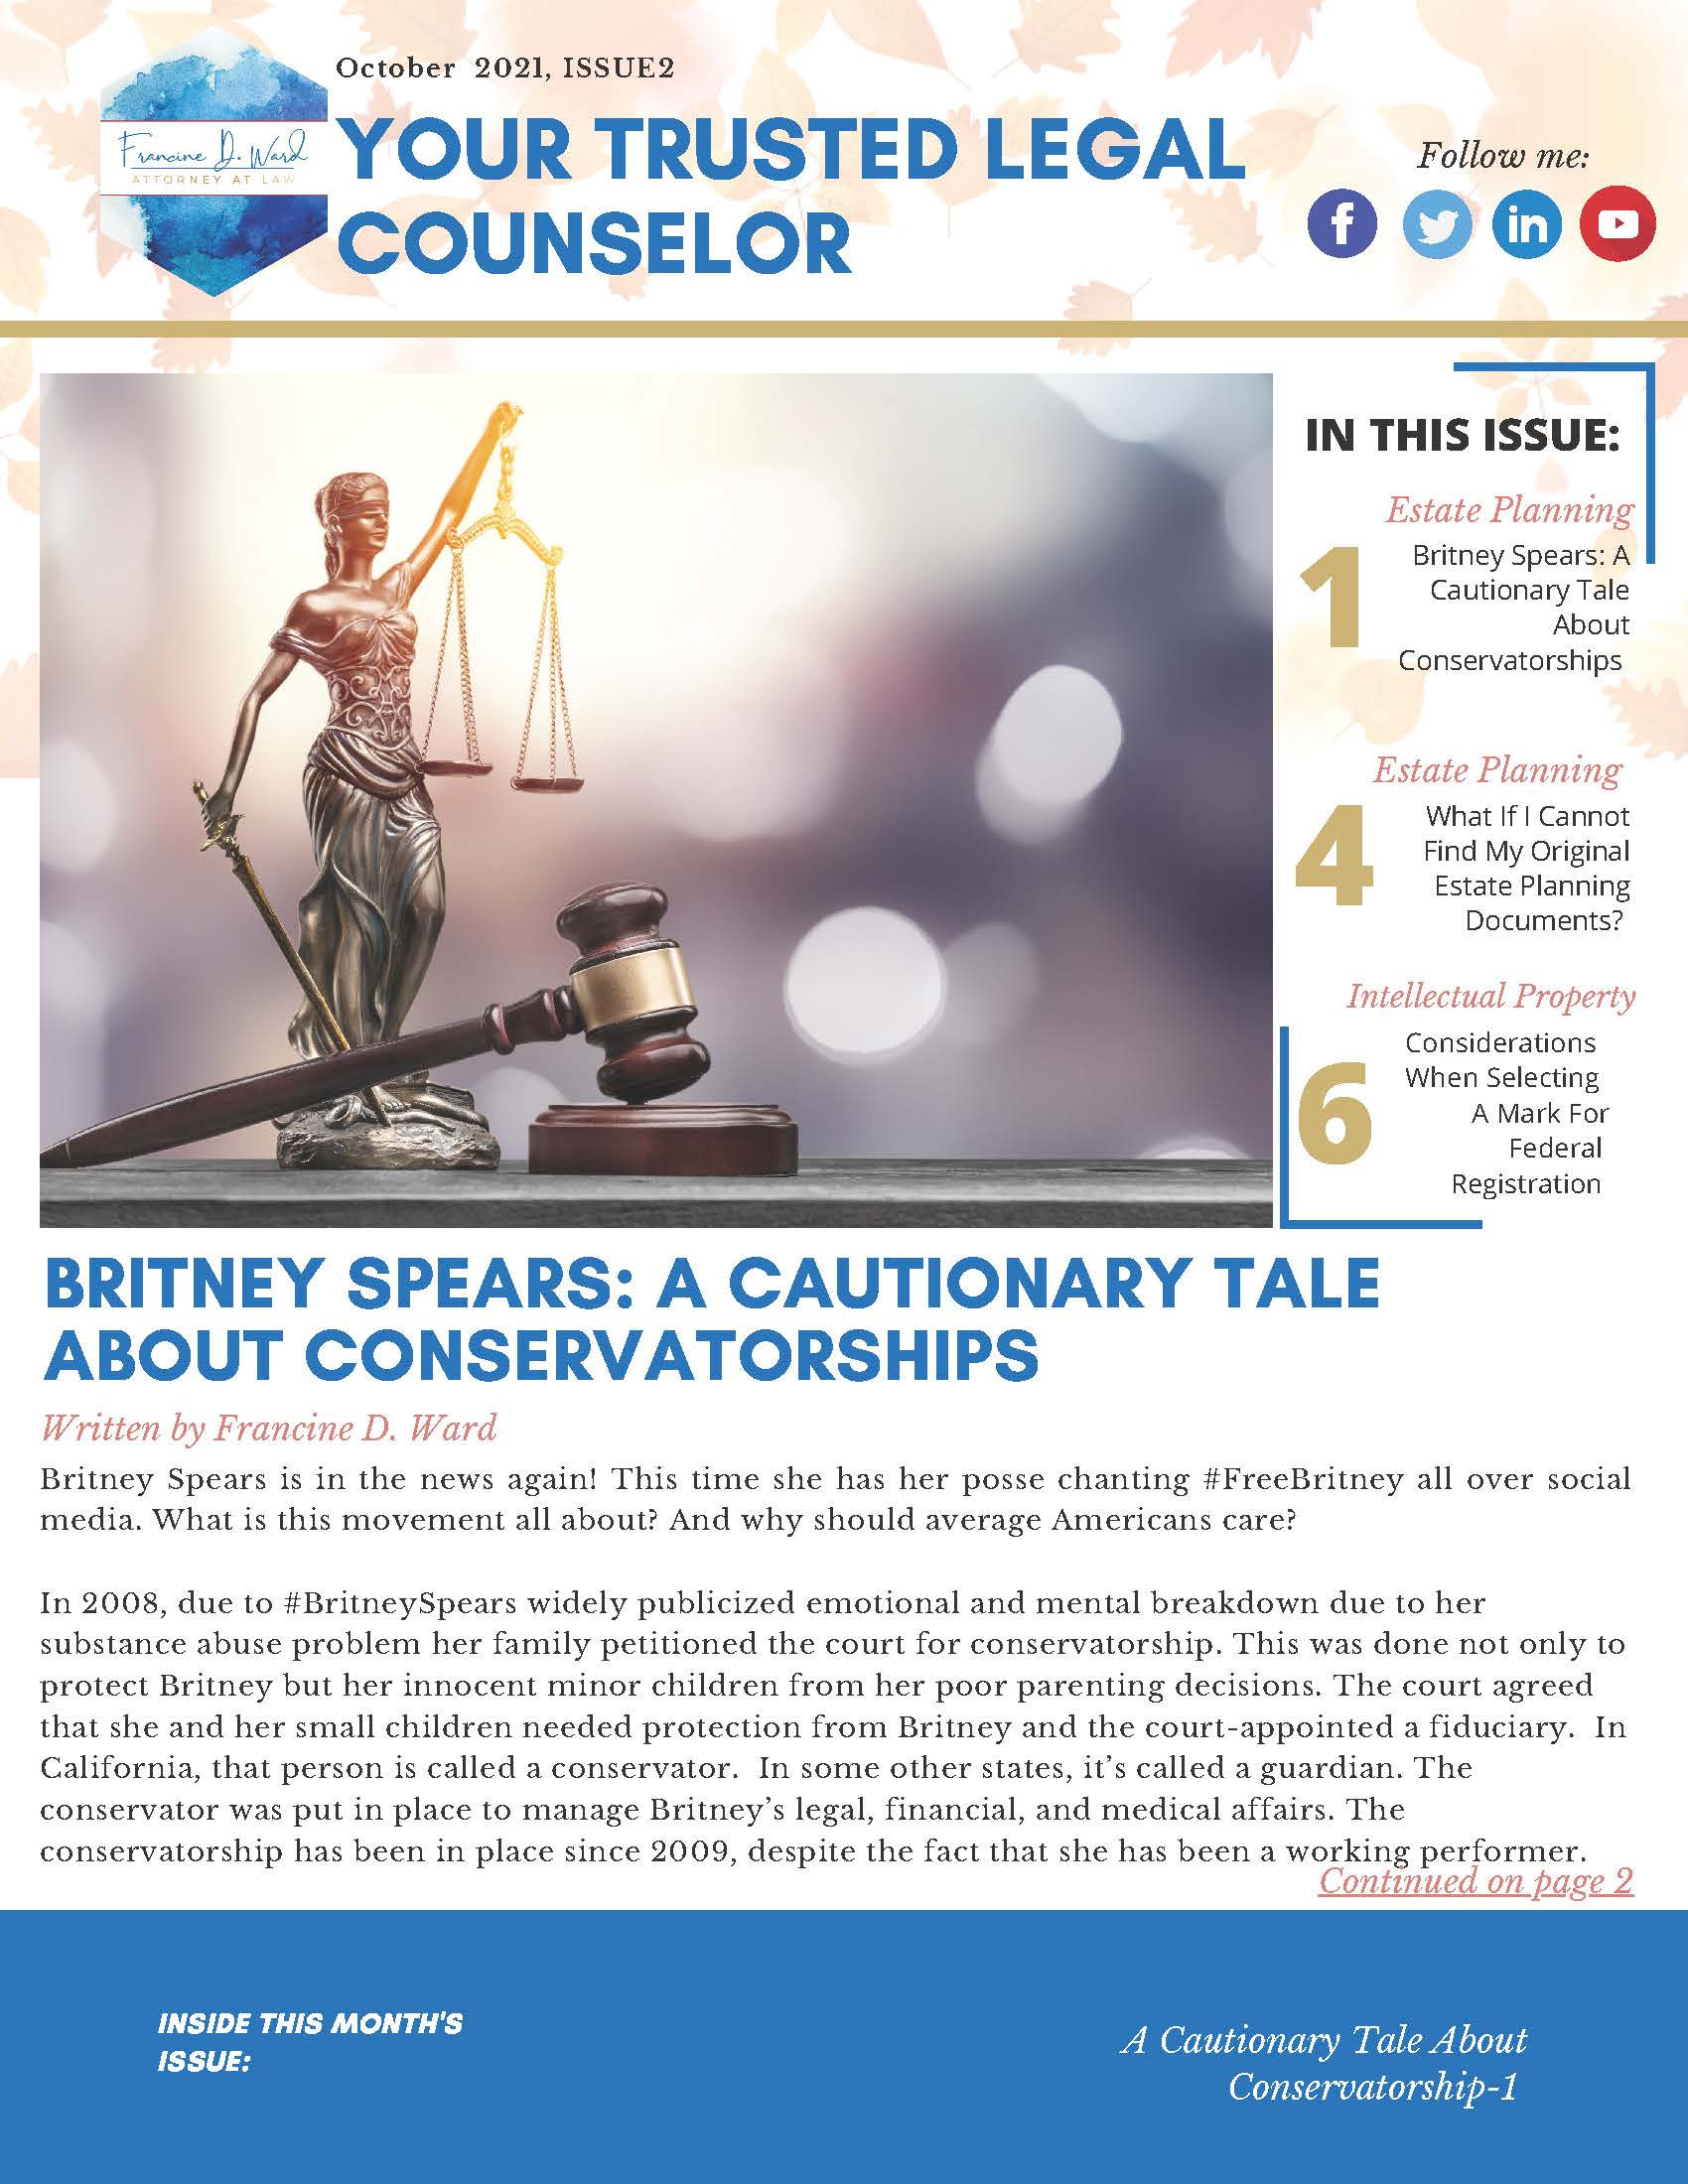 October Newsletter Francine D Ward Your Trusted Legal Counselor